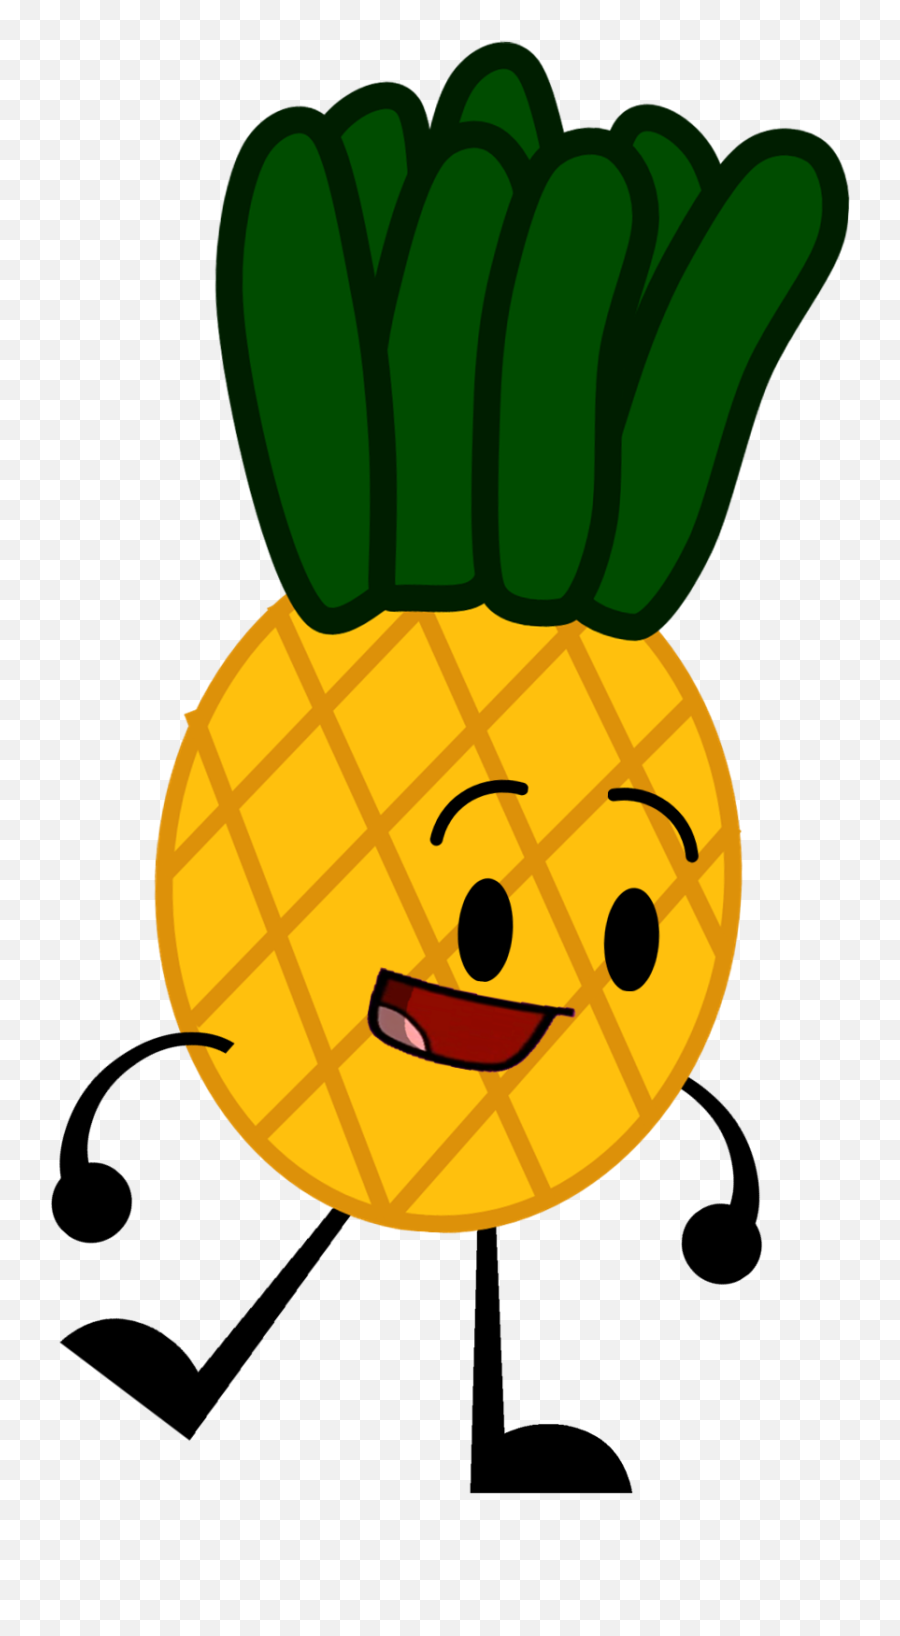 Download Hd Pineapple Clipart Object - Bfdi Pineapple Yellow Objects Clip Art Png,Pineapple Clipart Transparent Background